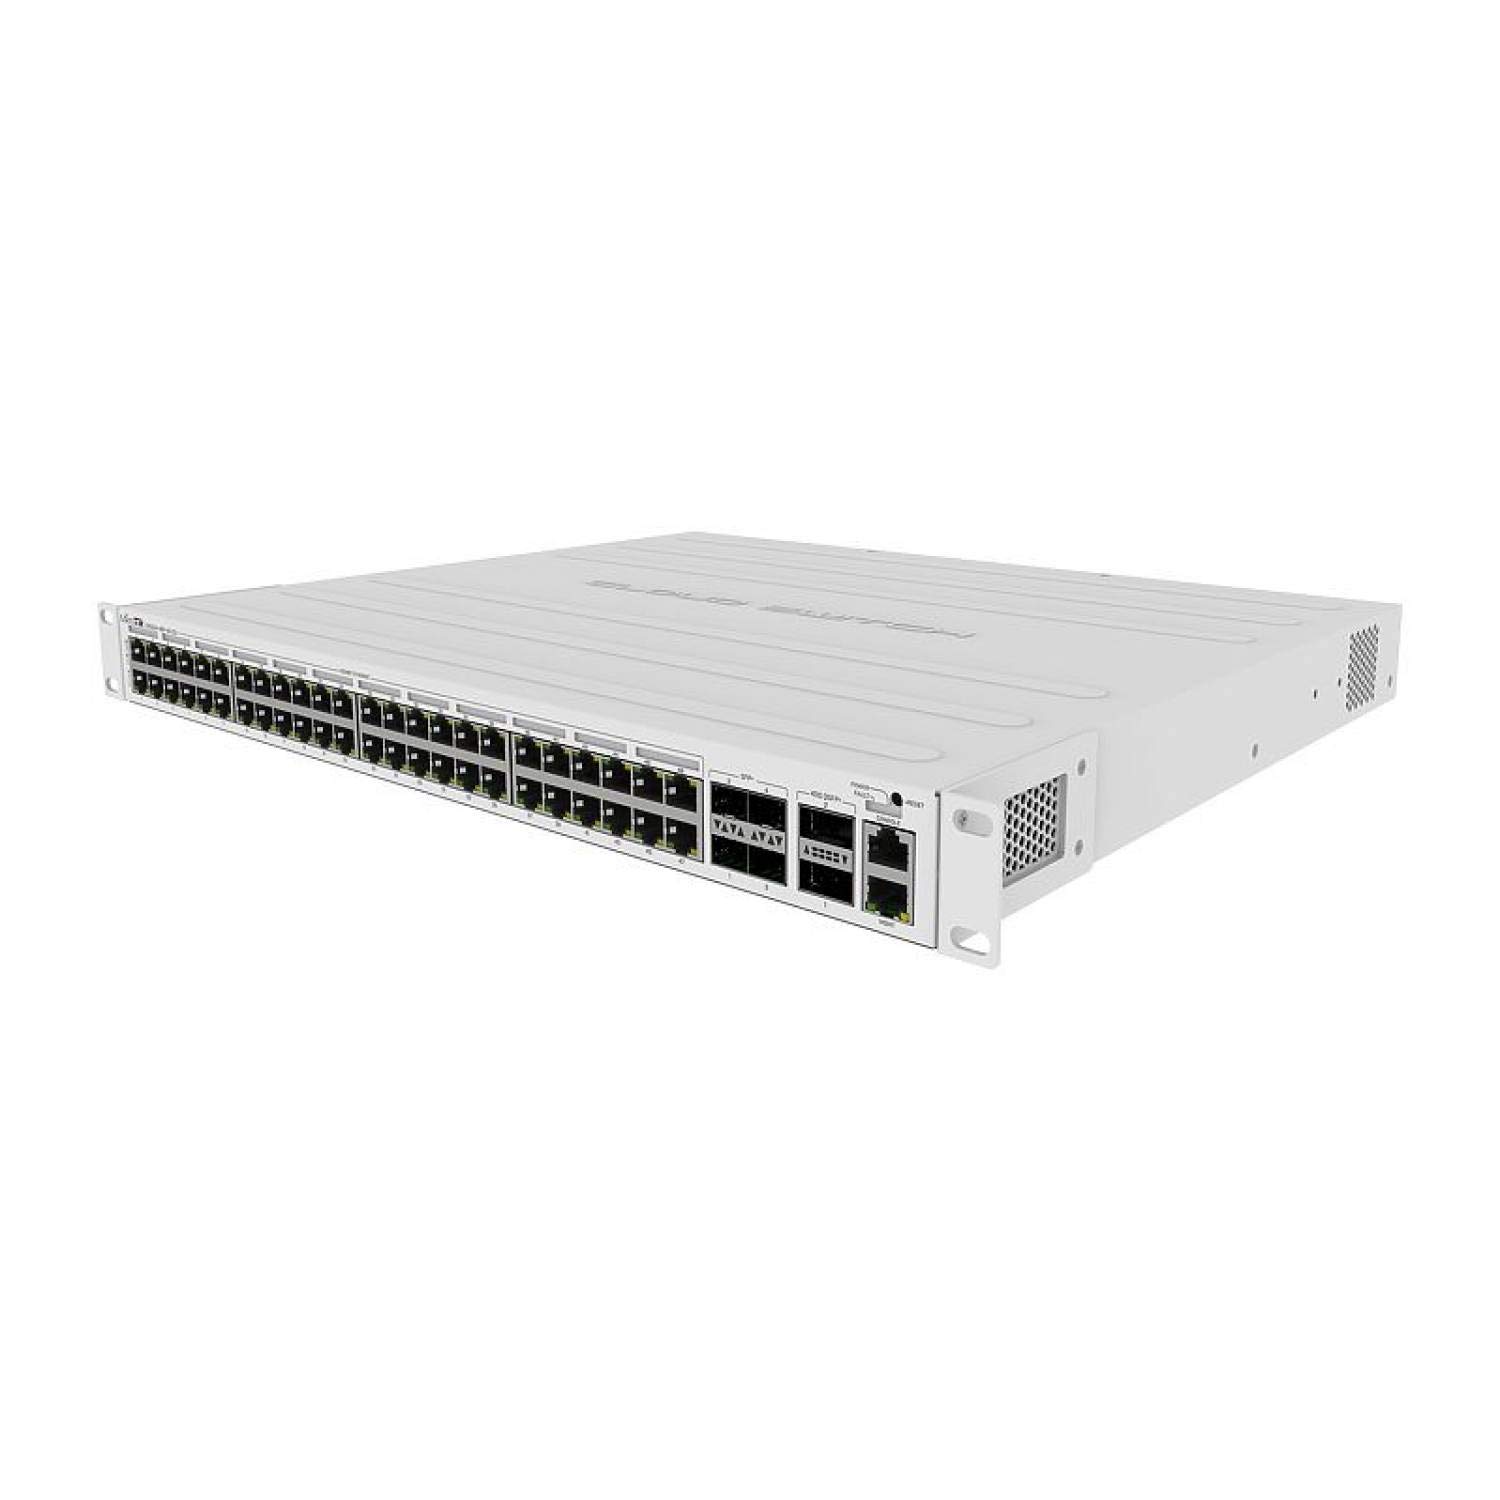 Mikrotik CRS354-48P-4S+2Q+RM 24 port Gigabit Ethernet router/switch with four 10Gbps SFP+ ports in 1U rackmount case